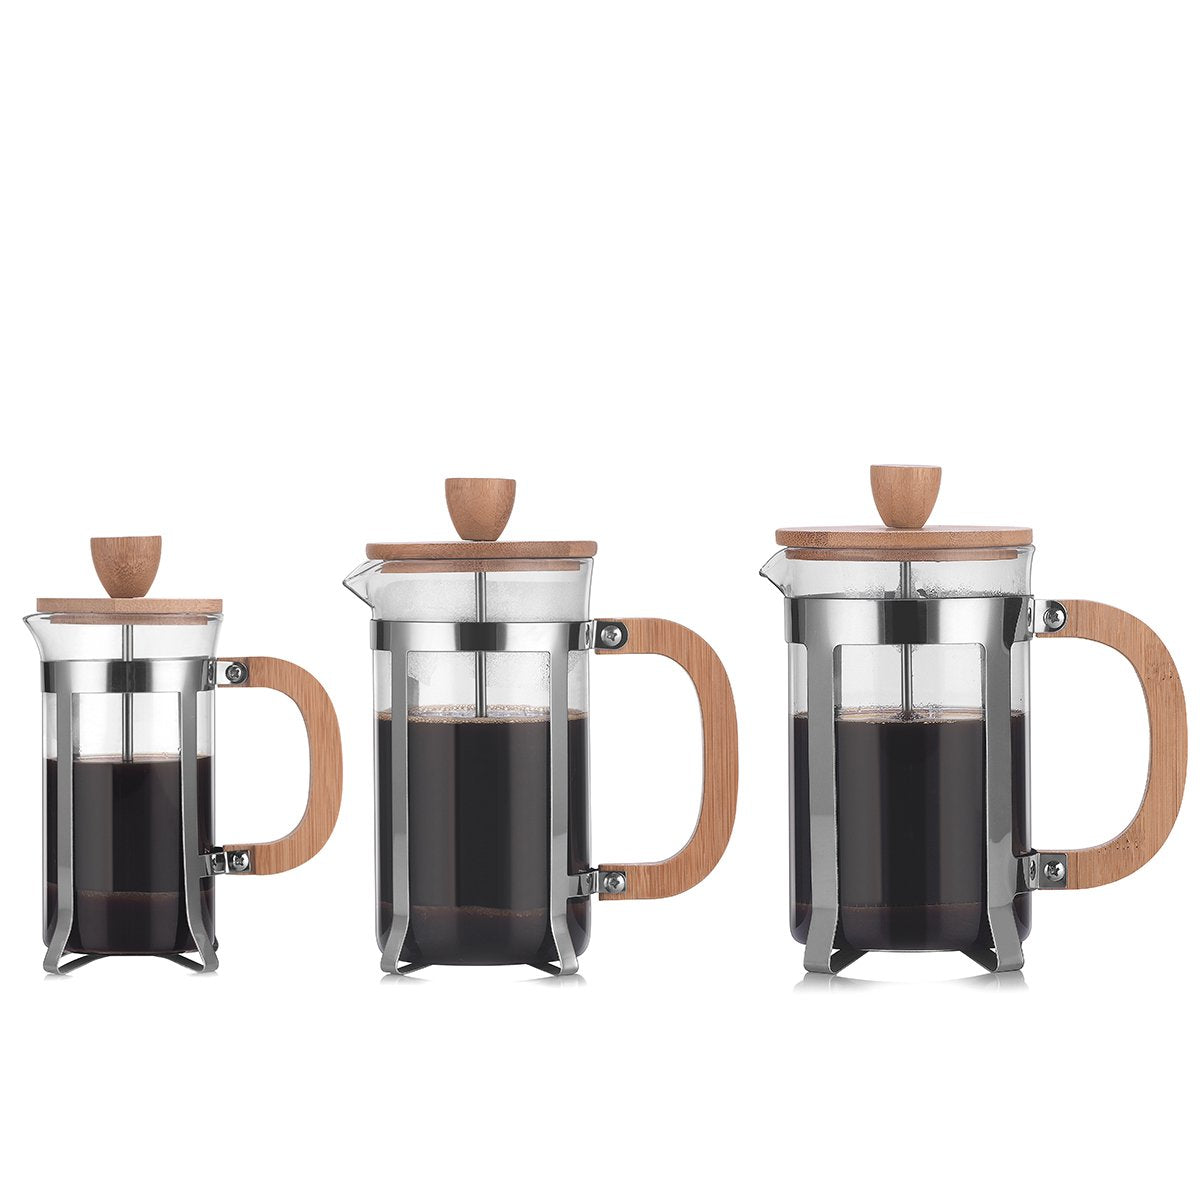 SUGIFT 8 Cup French Press Chrome Coffee Maker